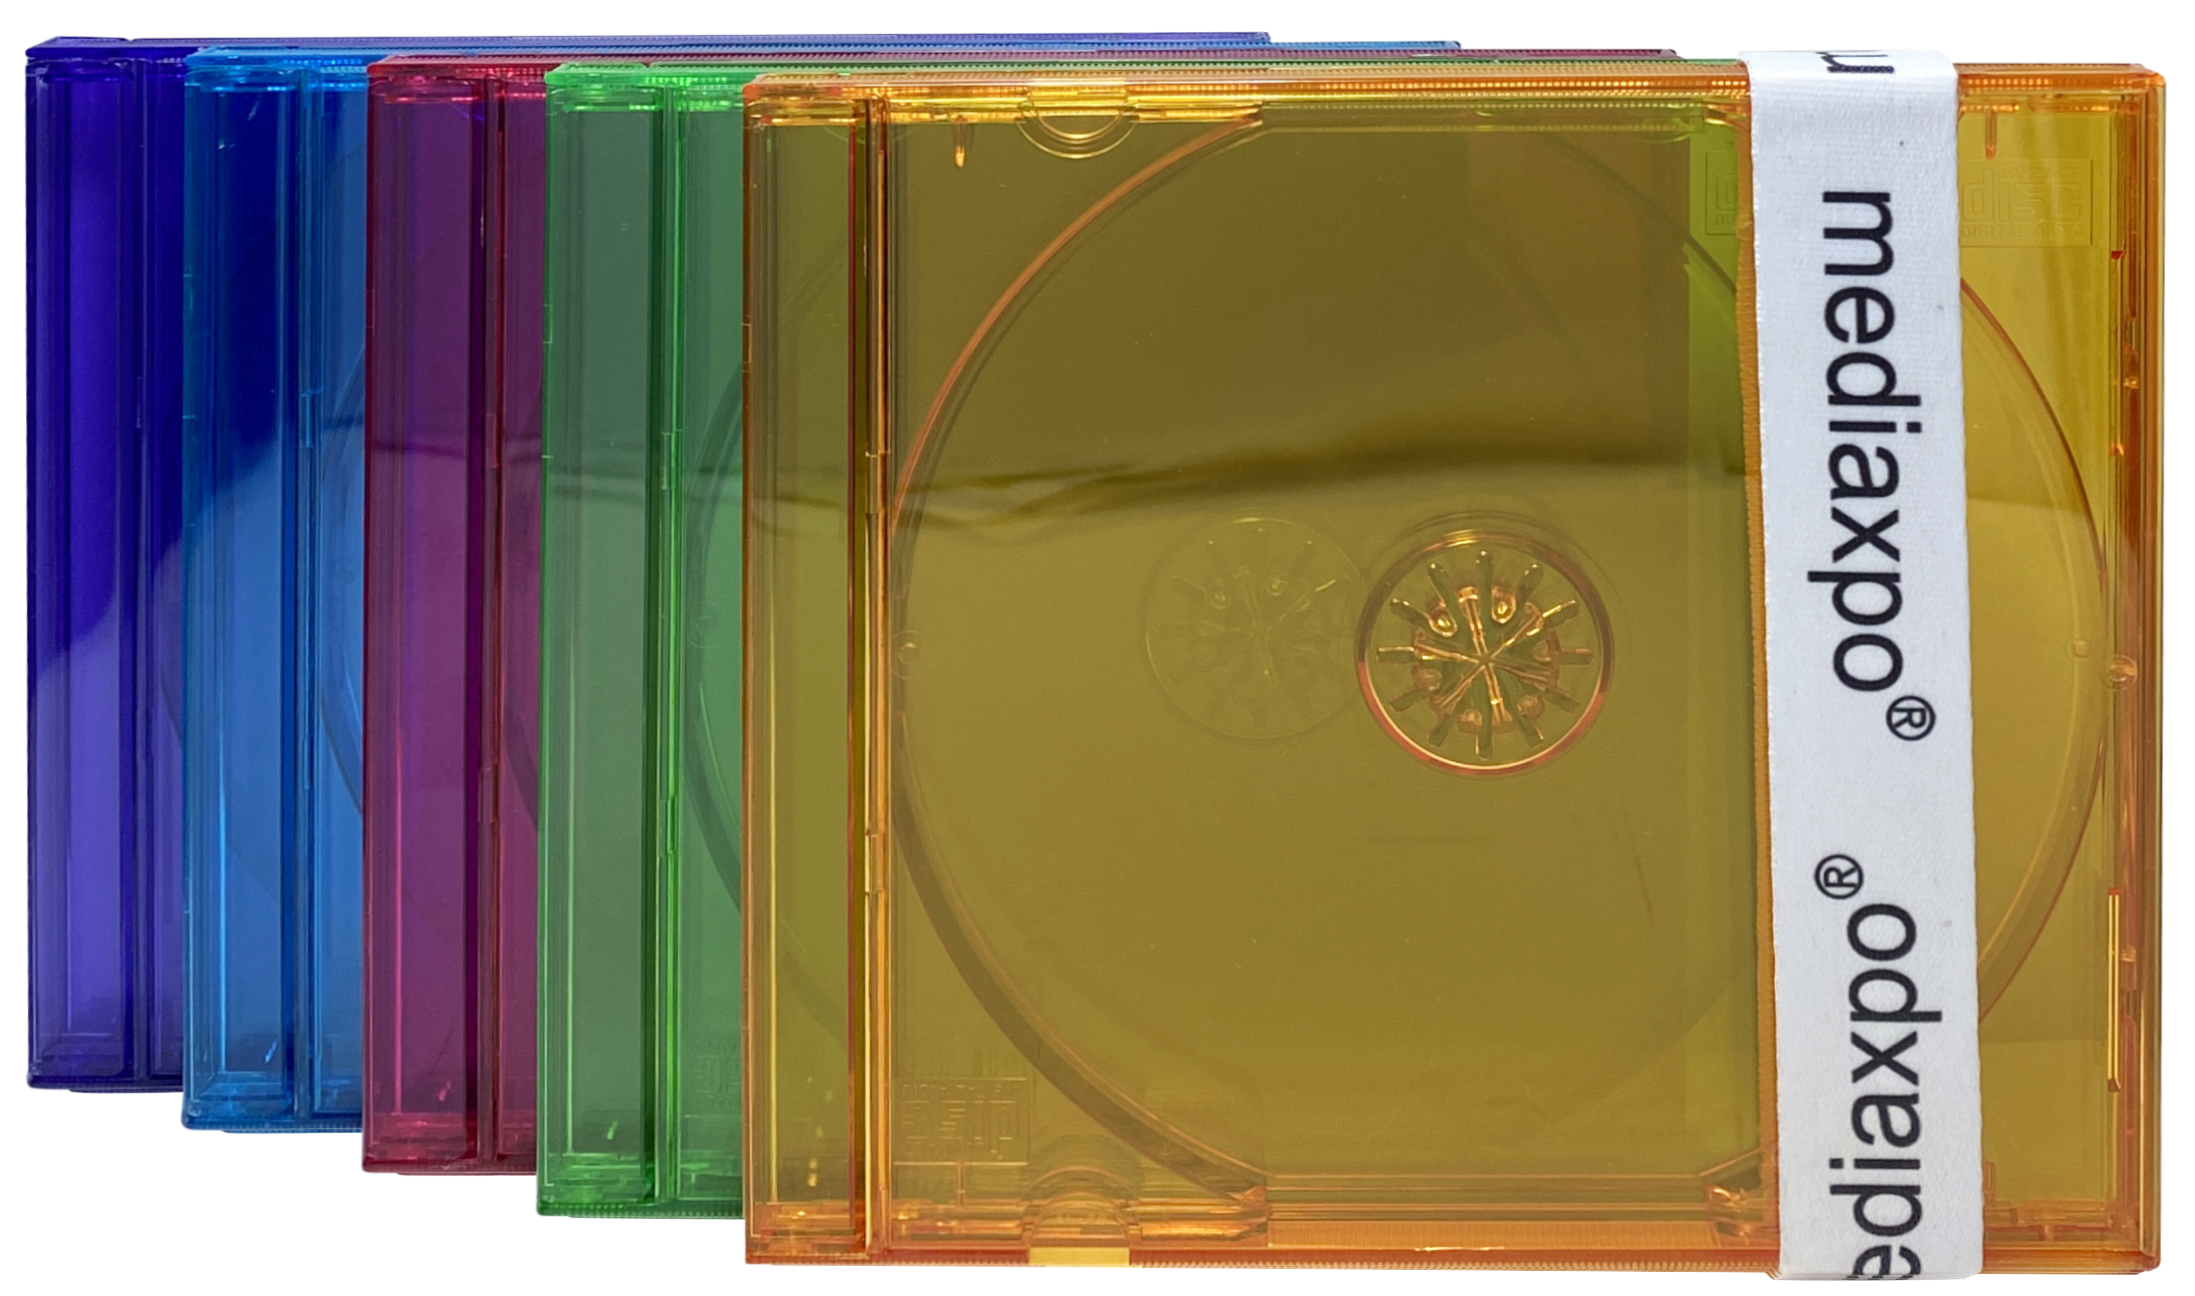 Image of ID 1214259008 200 STANDARD Assorted Clear Color CD Jewel Case